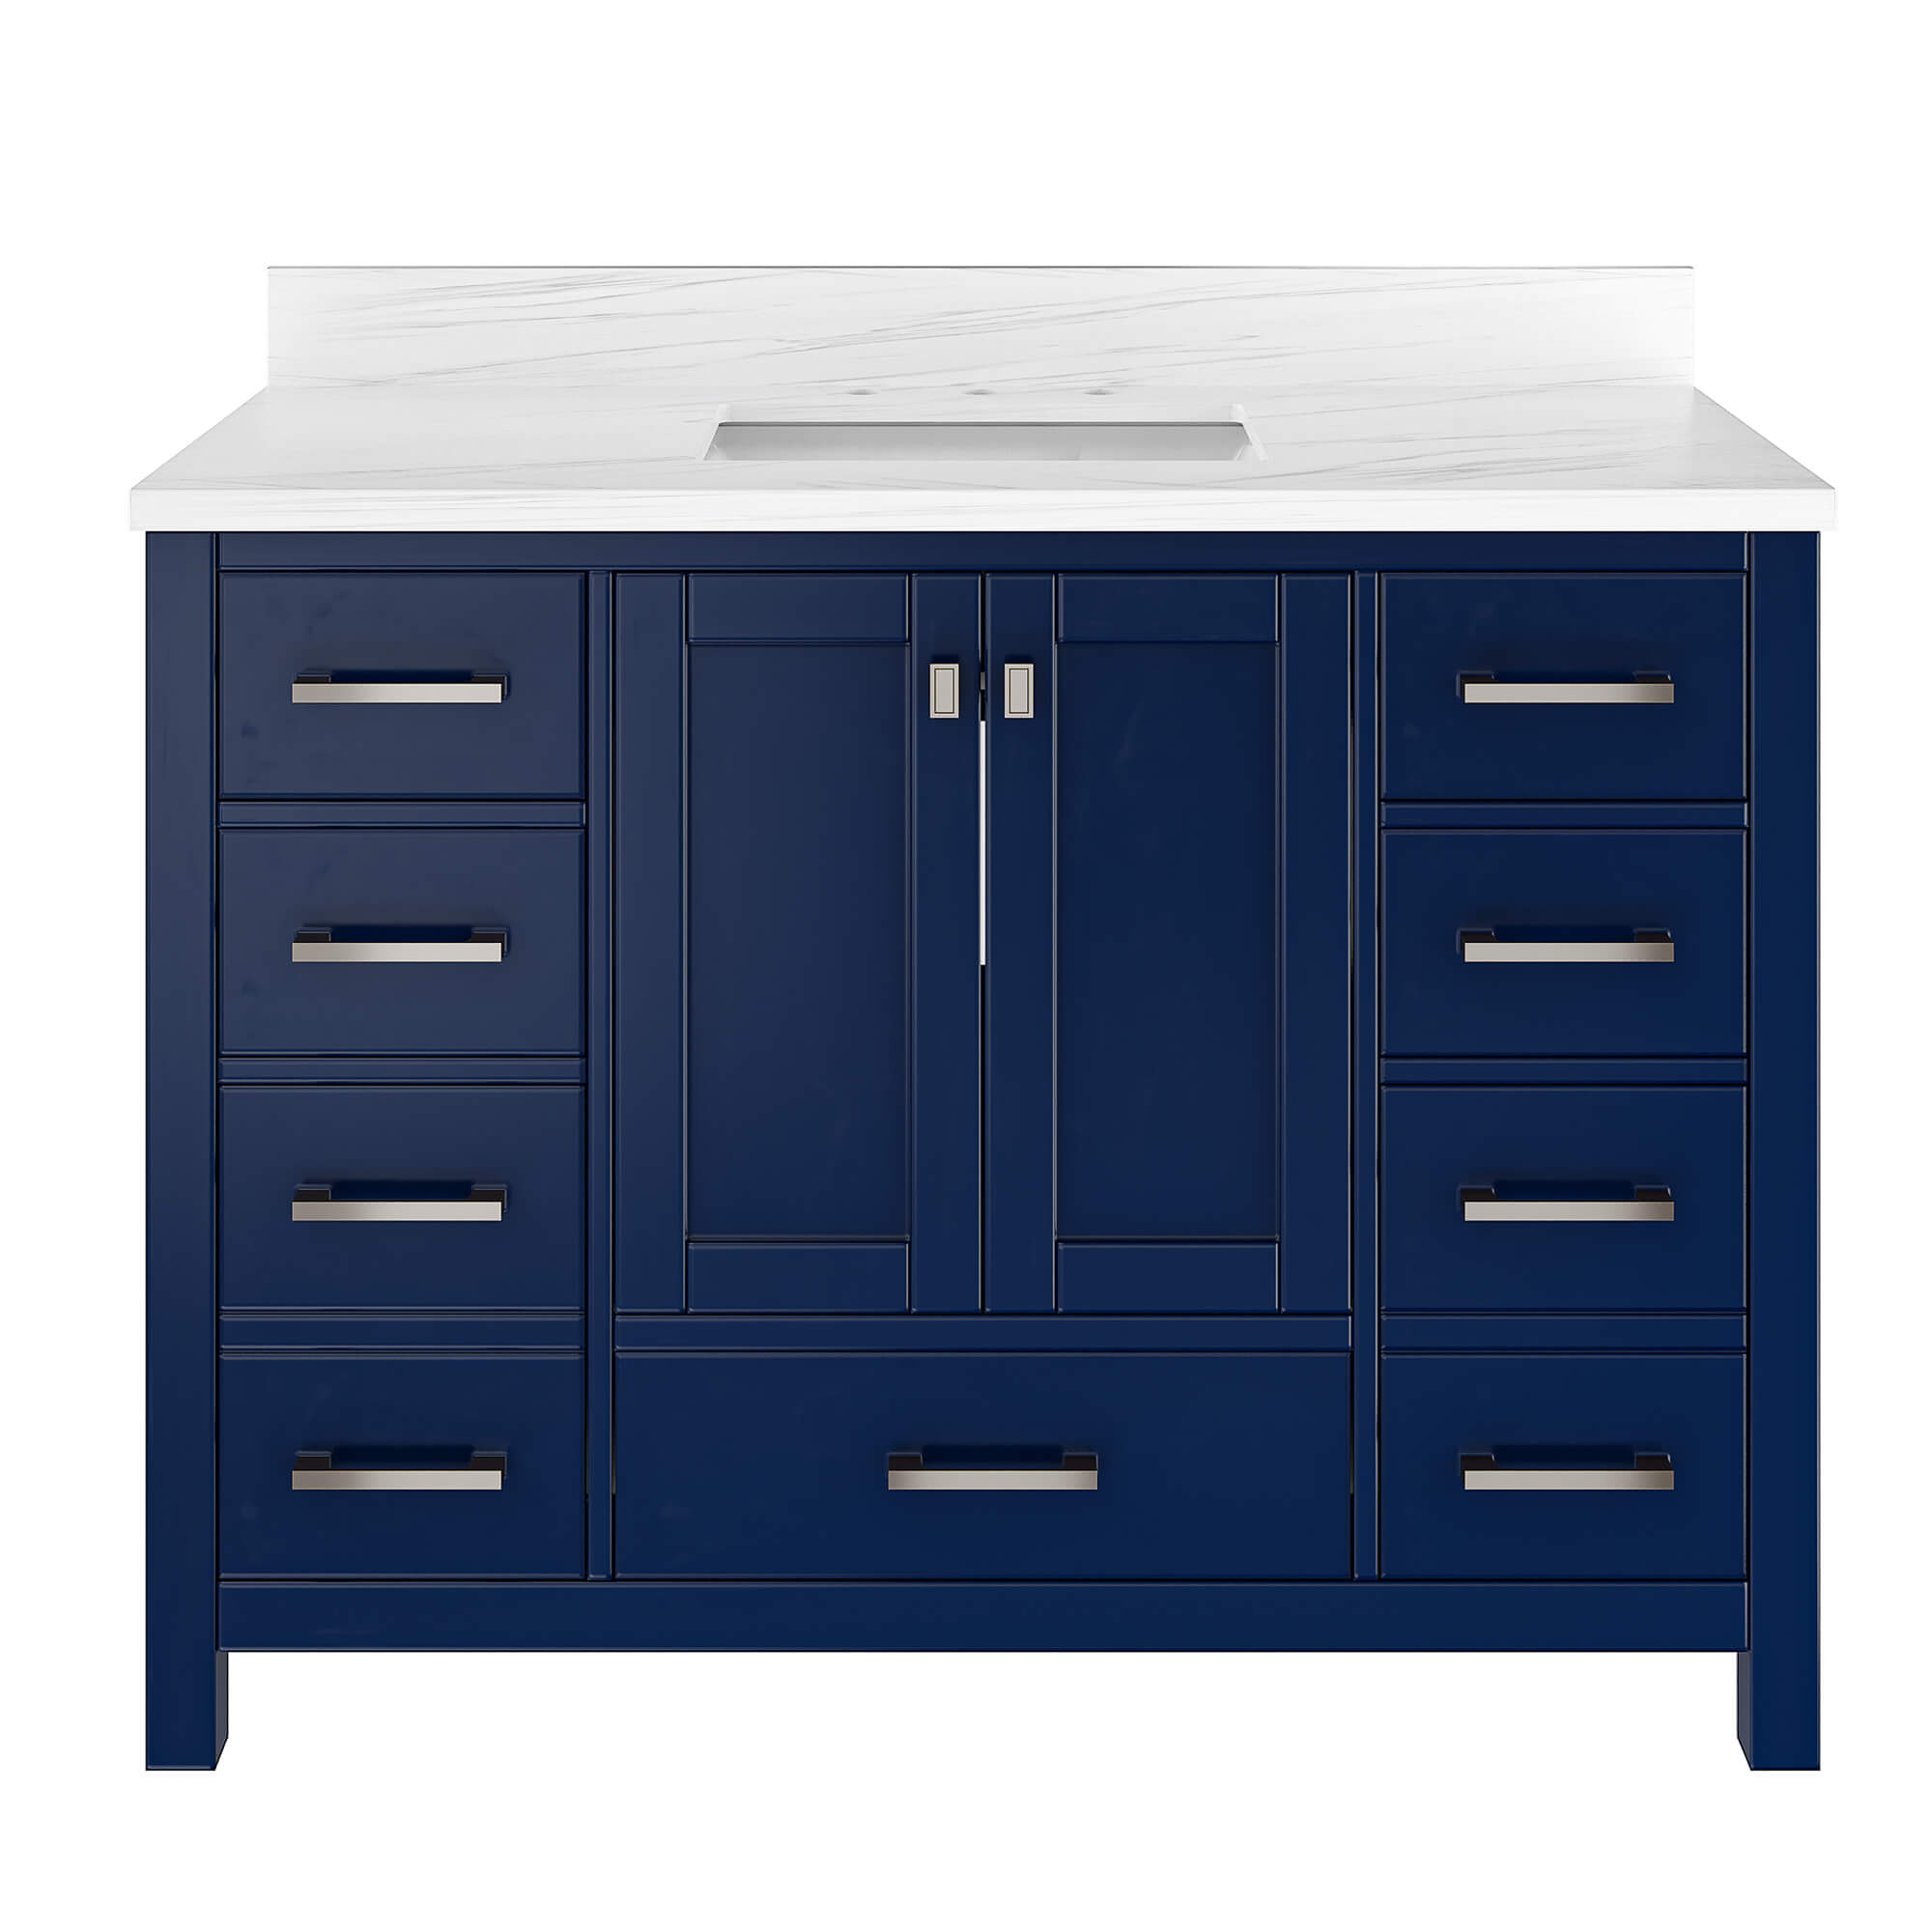 CASAINC 48 x 22 x 35.4 in. Solid Wood Navy Blue Bath Vanity with Carrara White Marble Countertop (No/With Mirror)